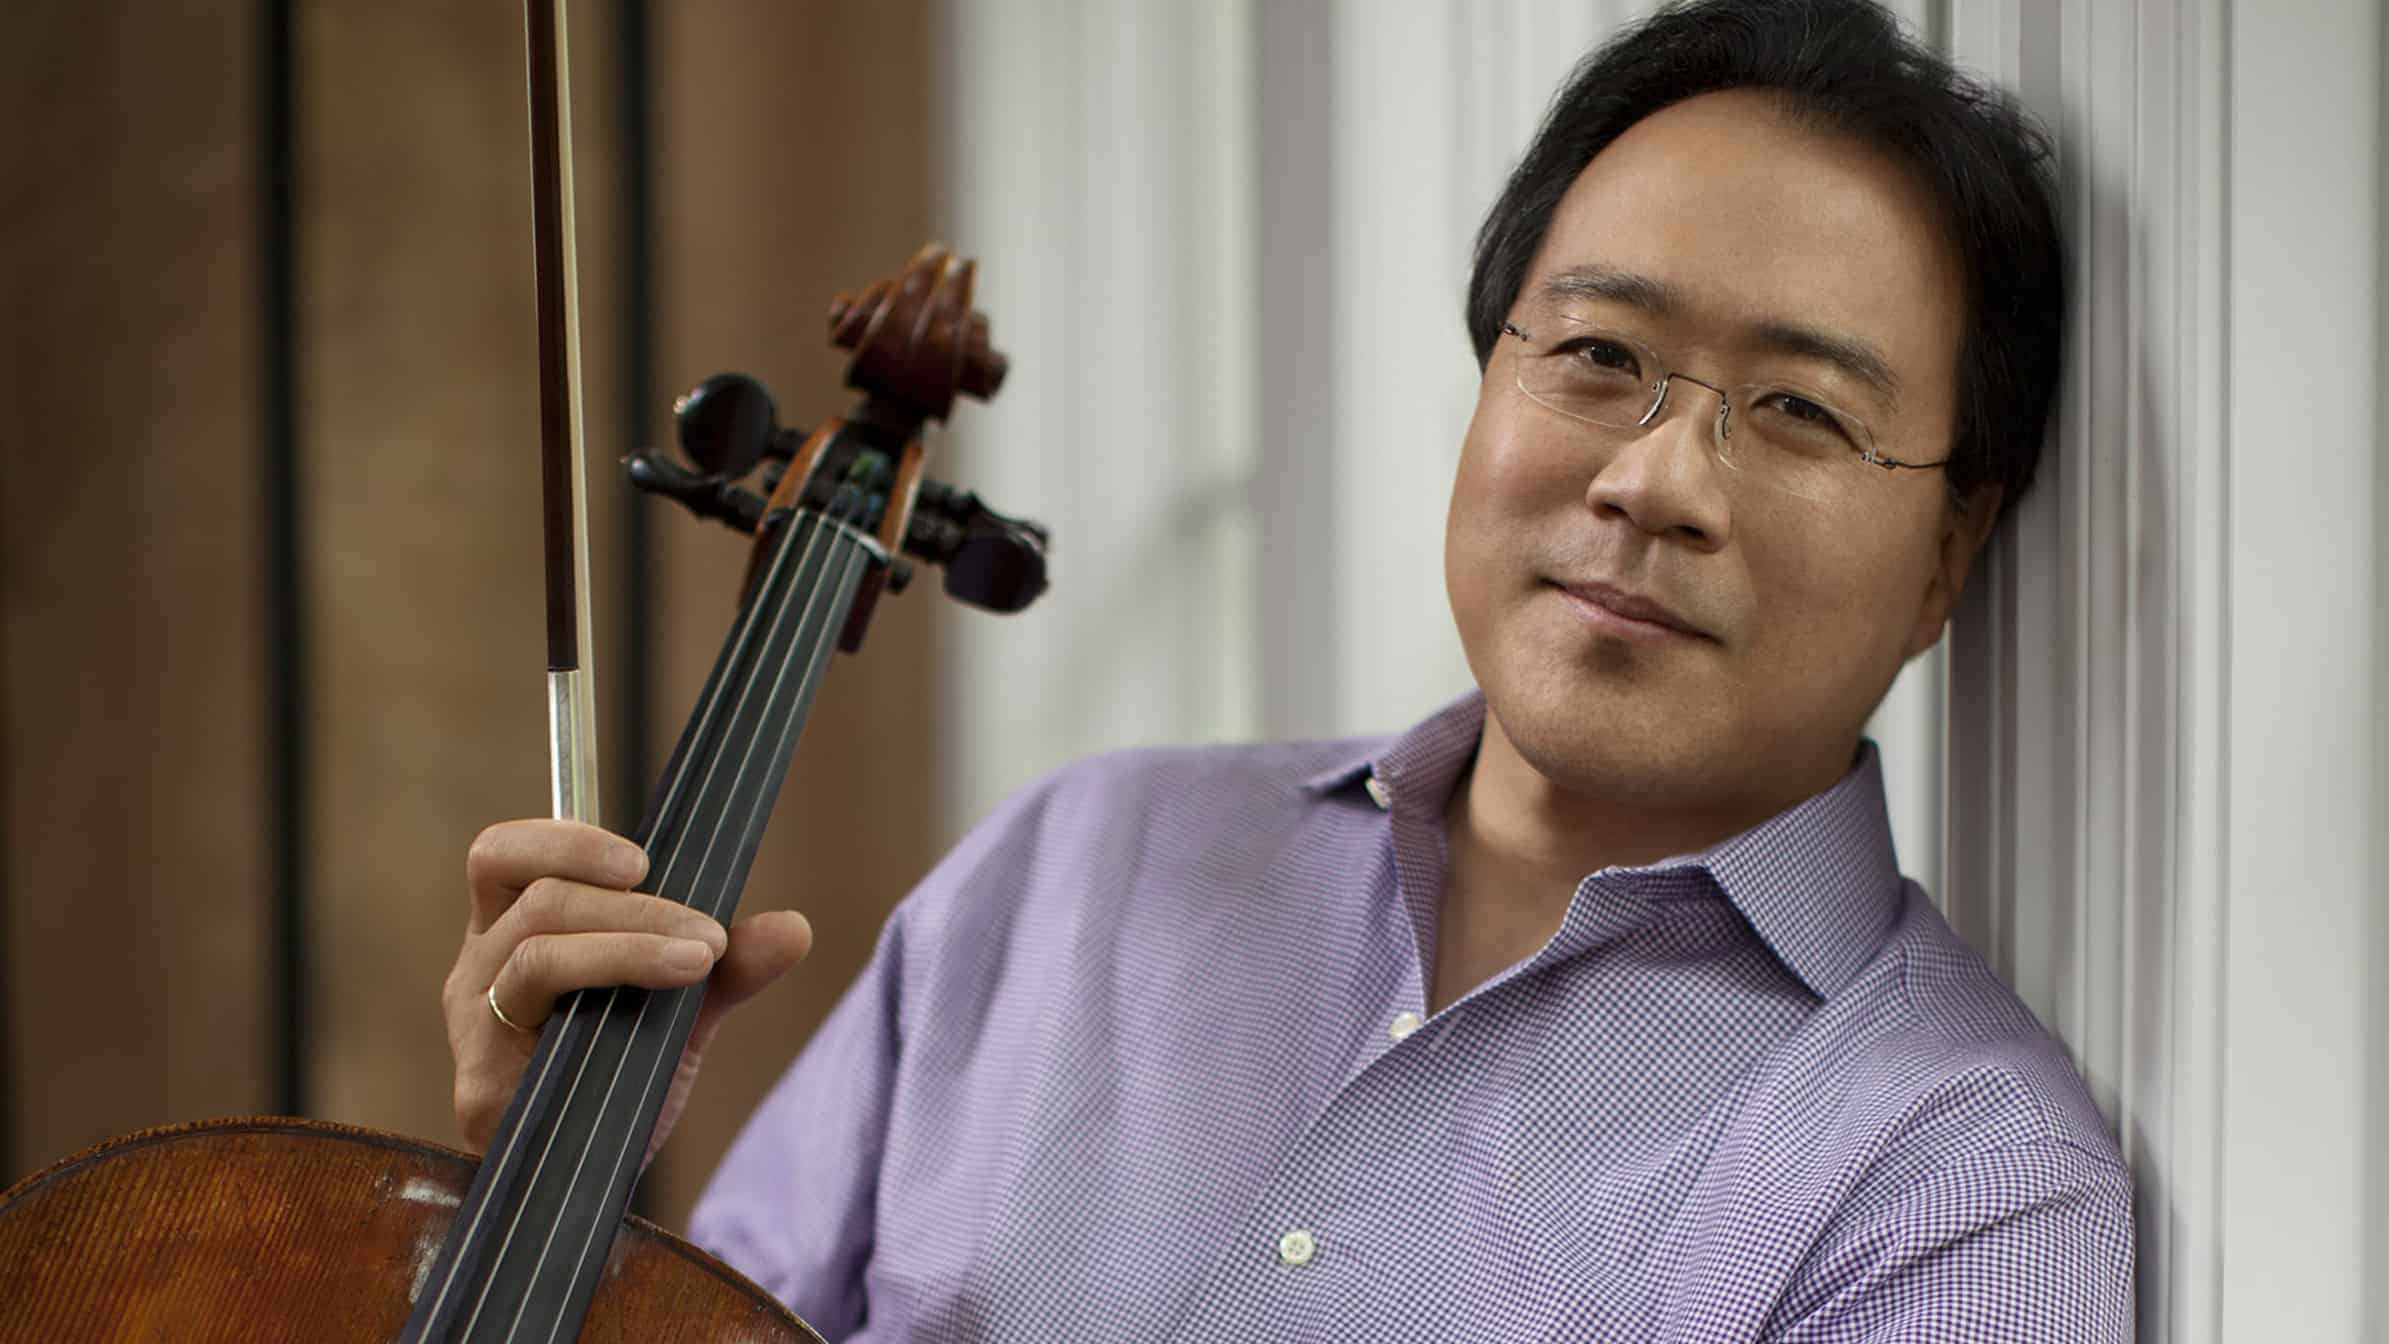 Acclaimed cellist Yo-yo Ma will perform in August at Tanglewood, the summer home of the Boston Symphony Orchestra. Photo by Jeremy Cowart.